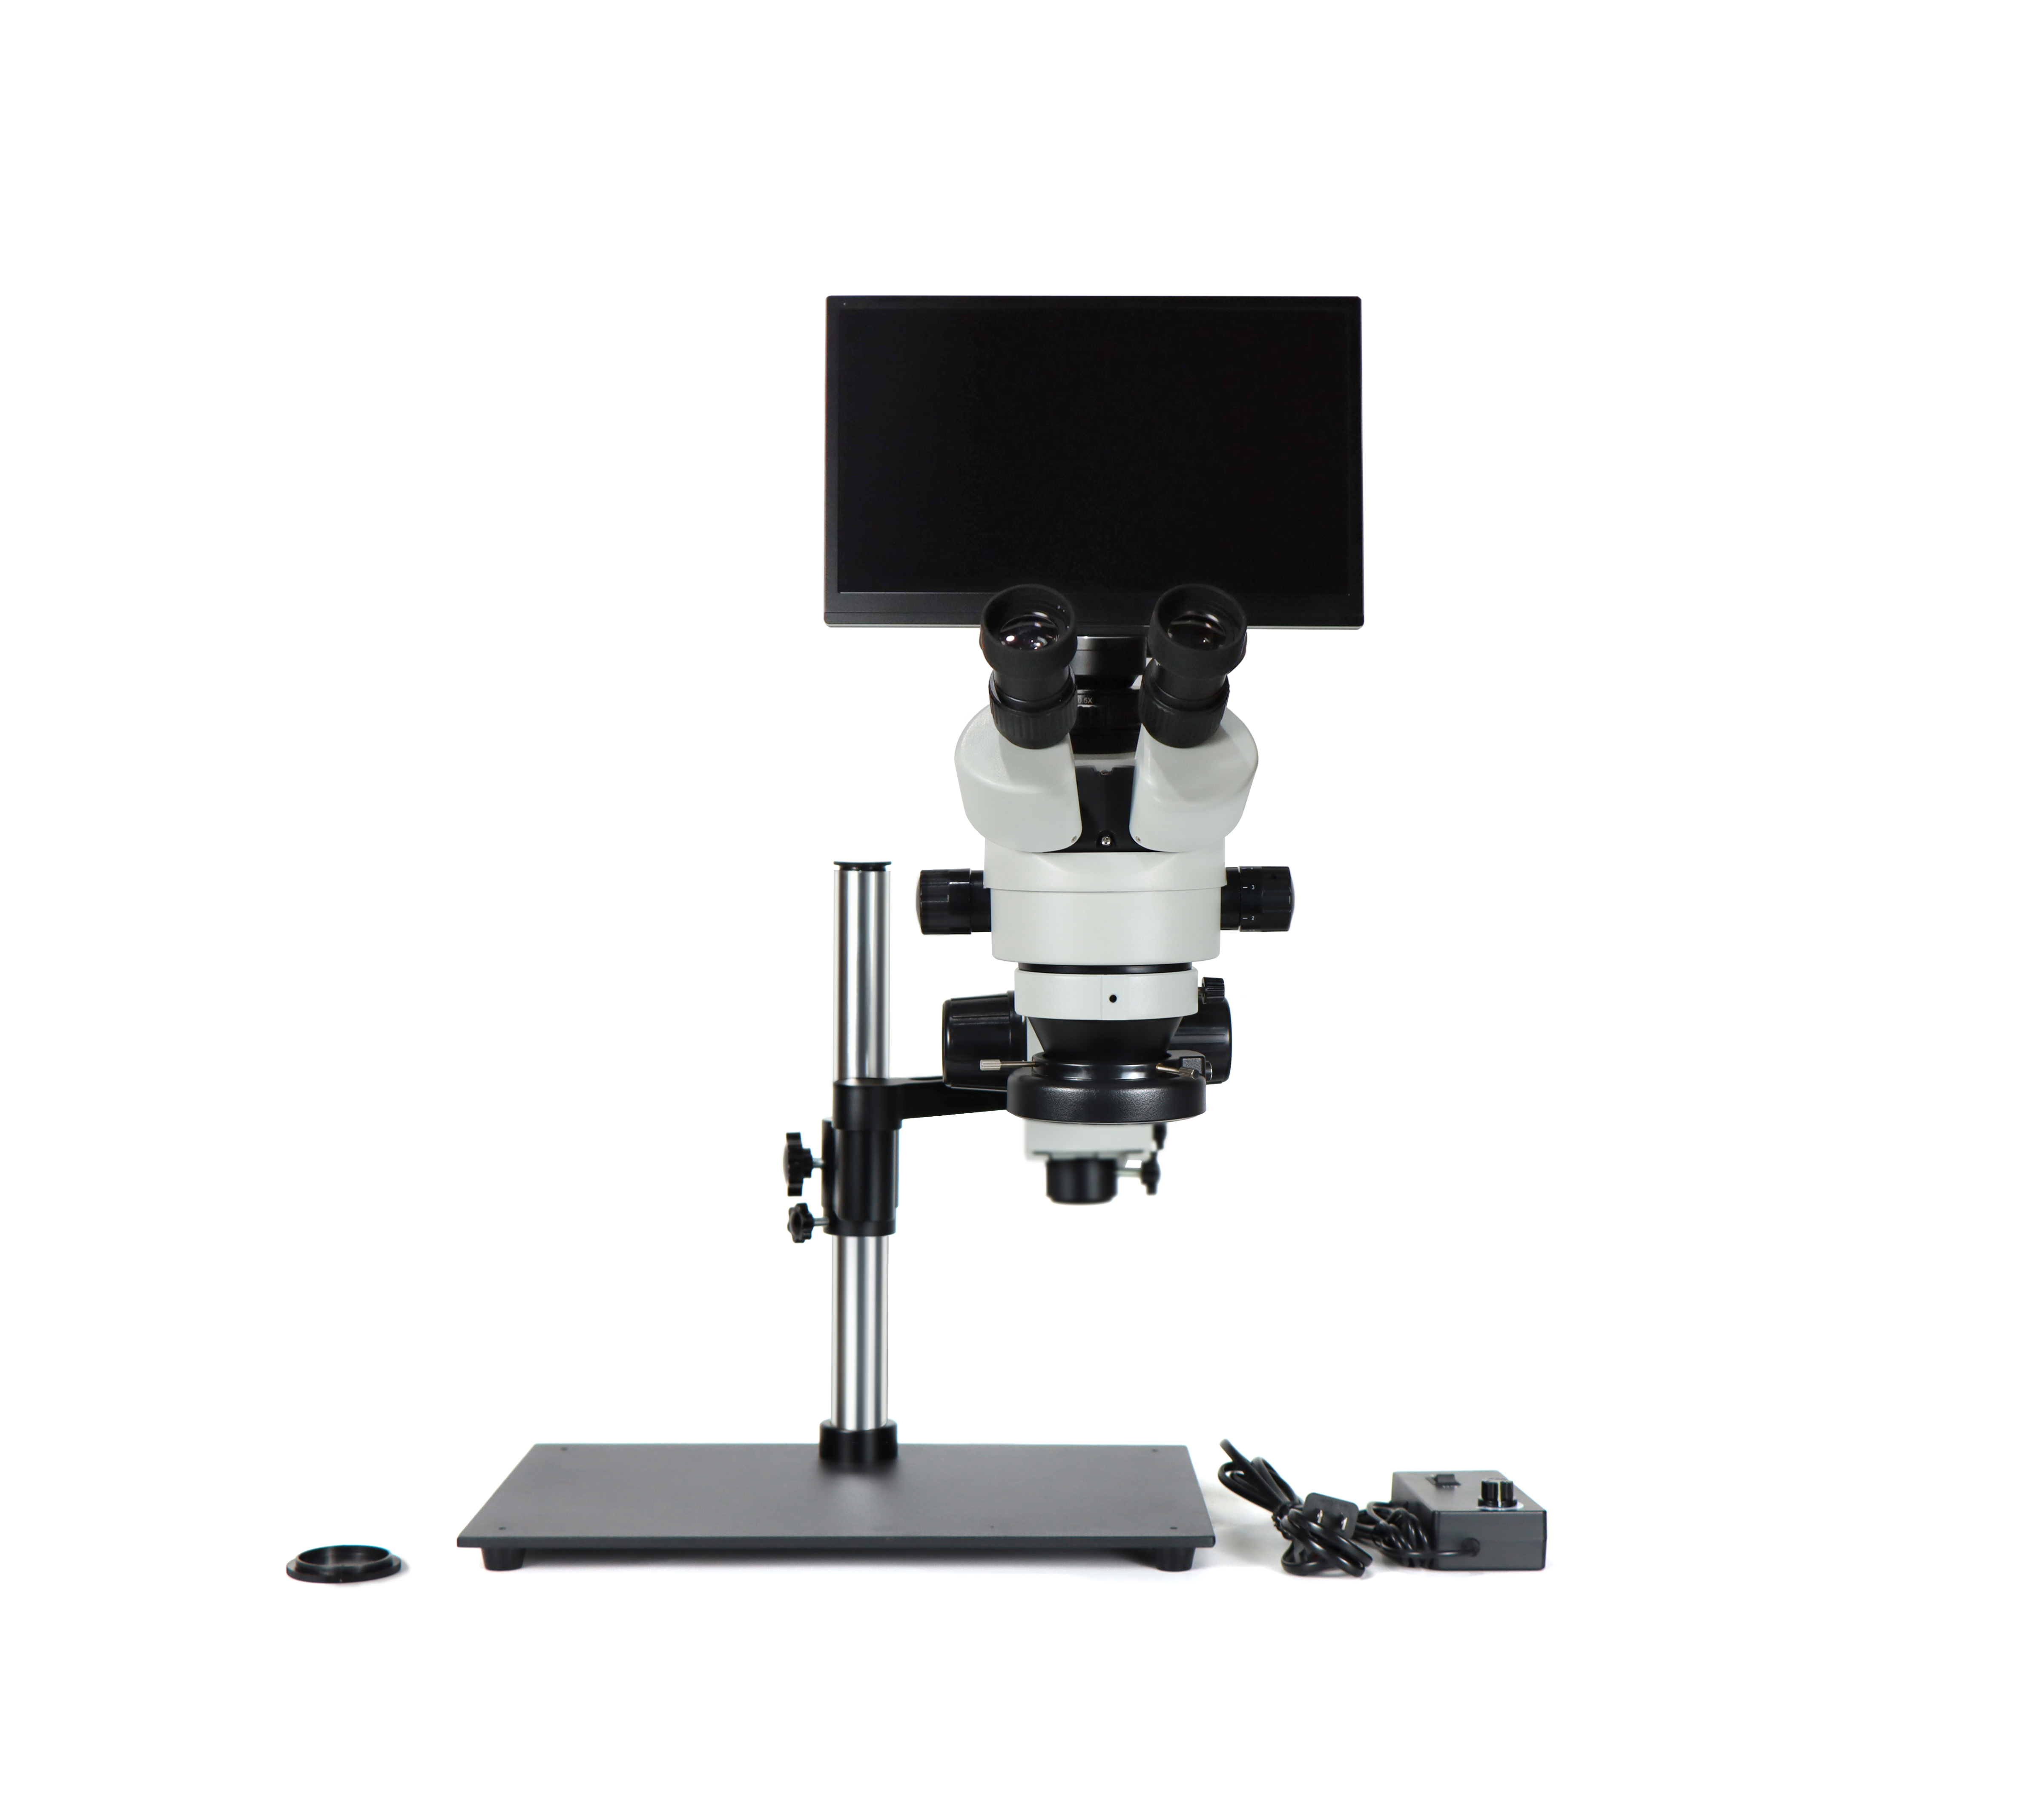 HH-MH02B Microscope with screen